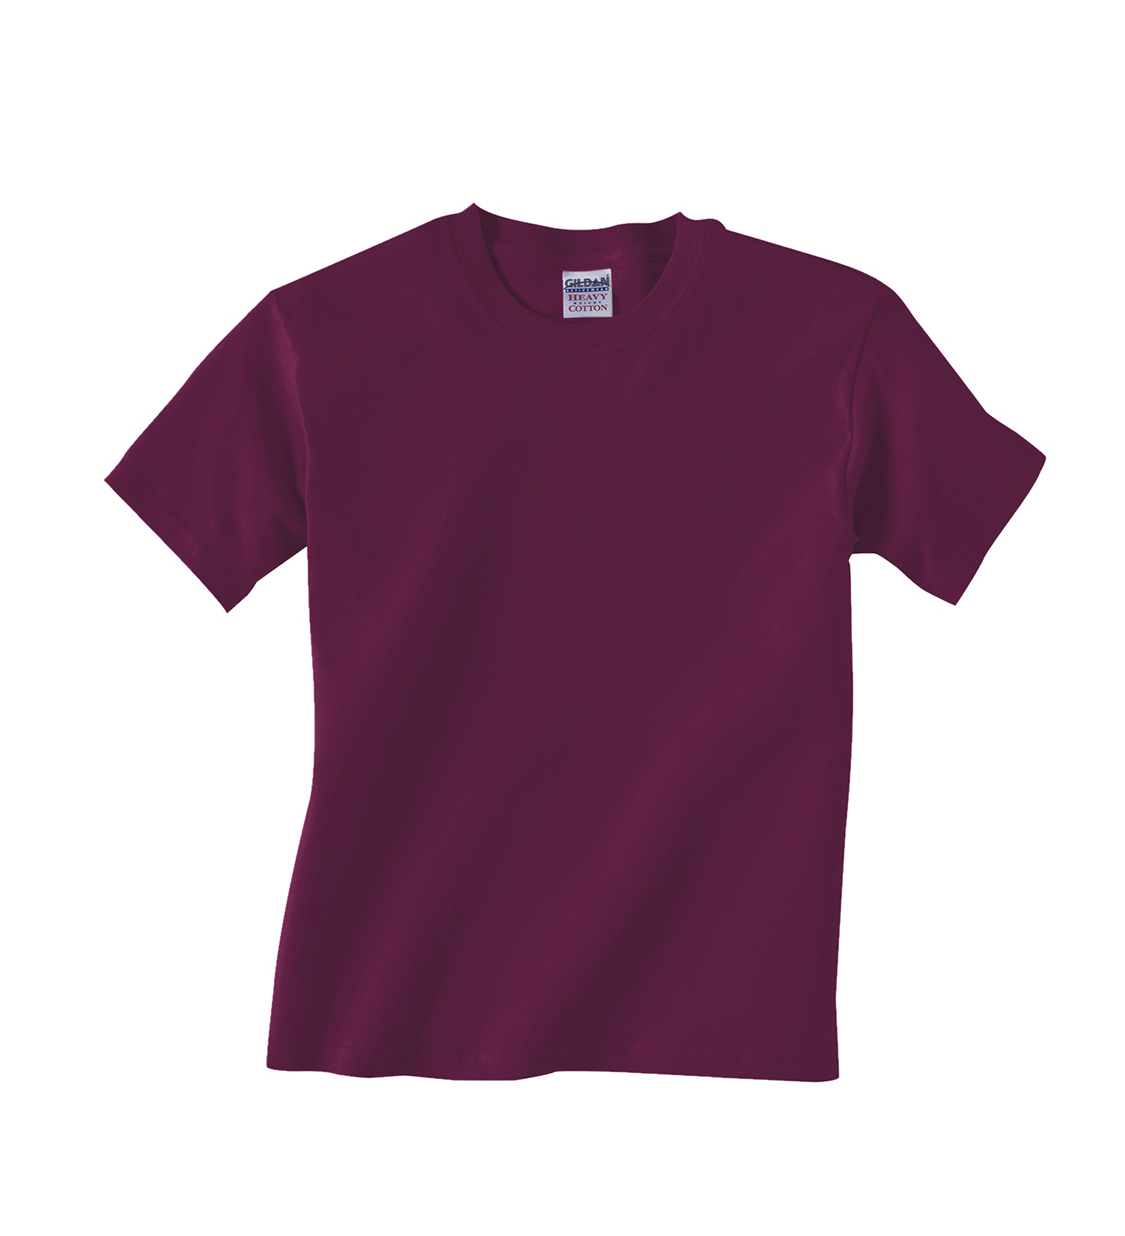 click to view MAROON